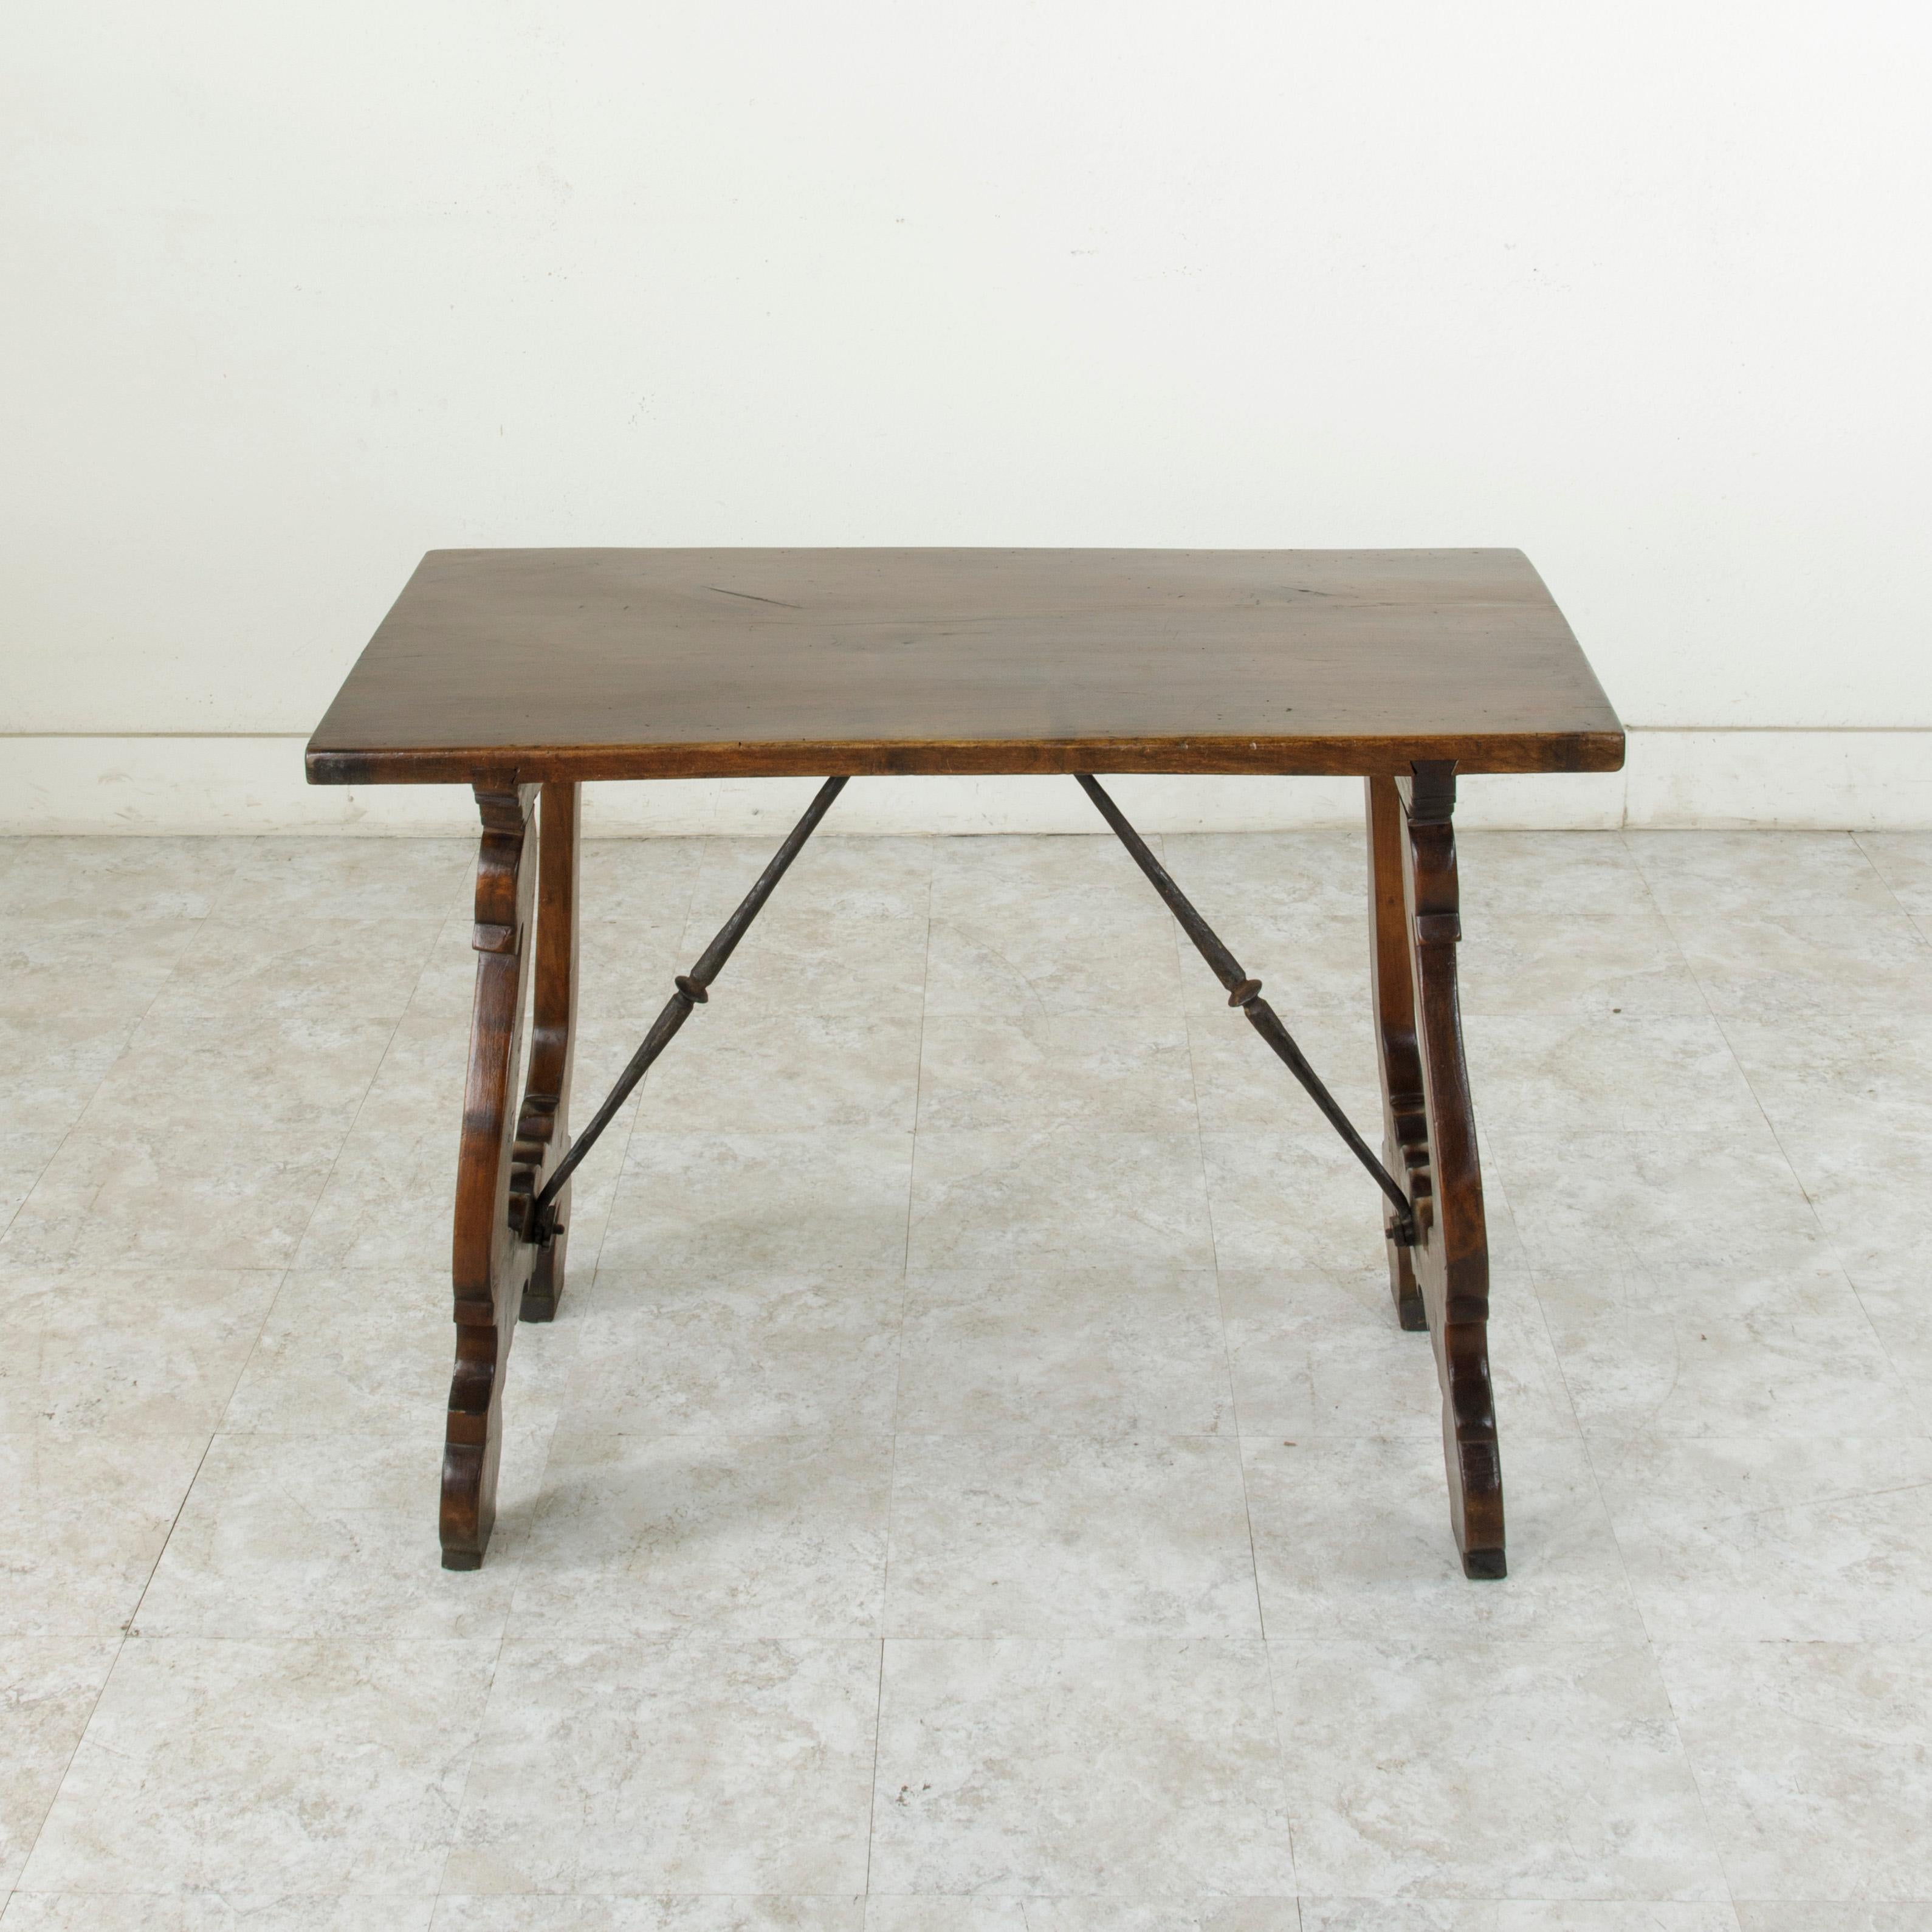 This small scale mid-19th century Spanish Renaissance style table features a 21-inch wide walnut top made from a single plank of wood. The top is joined to its elegantly curved legs by means of two splines that run the entire width of the table.